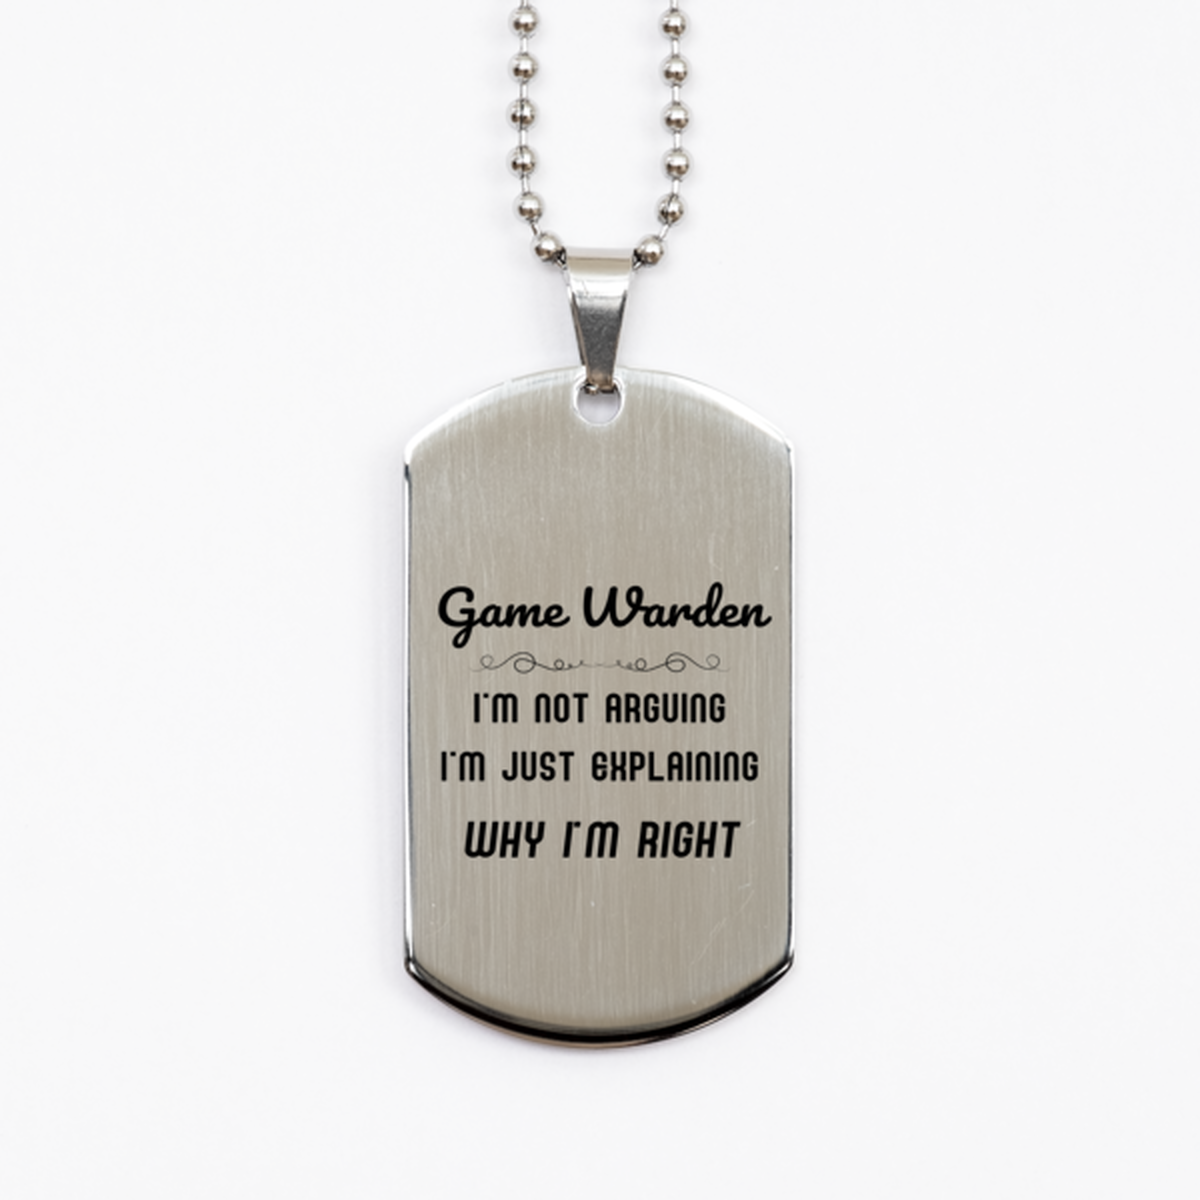 Game Warden I'm not Arguing. I'm Just Explaining Why I'm RIGHT Silver Dog Tag, Funny Saying Quote Game Warden Gifts For Game Warden Graduation Birthday Christmas Gifts for Men Women Coworker